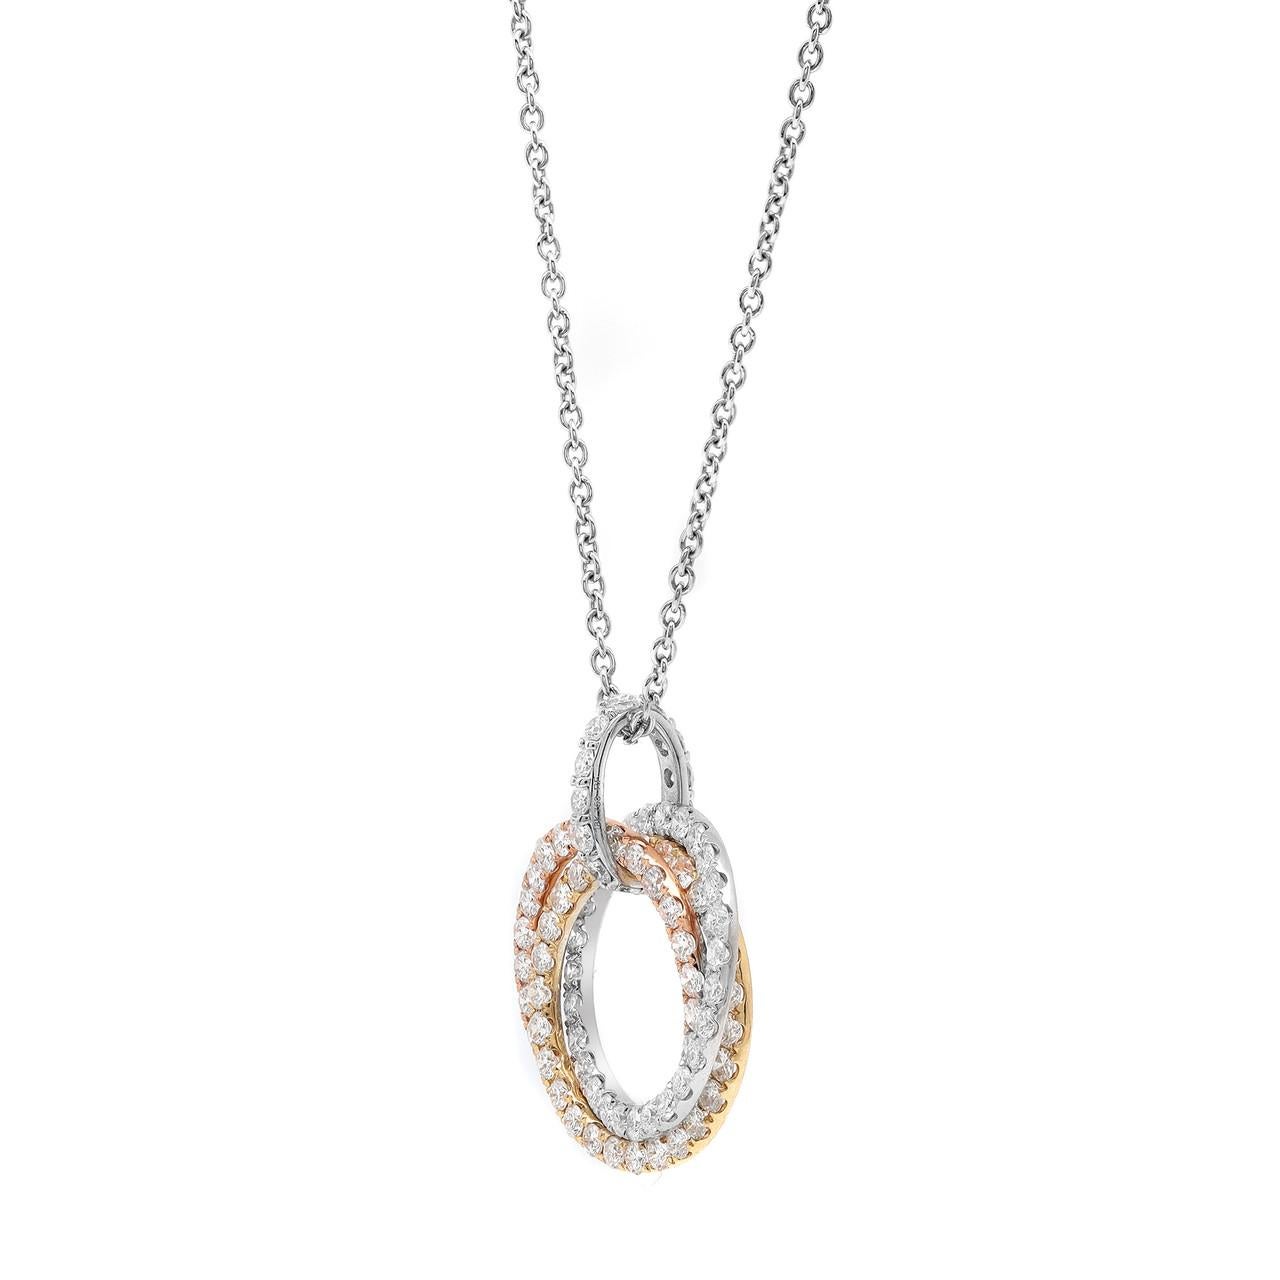 The Circle Diamond Pendant is a stunning piece of fine jewelry that exudes elegance and versatility. Crafted in 18K white gold, this pendant features a circle design adorned with round diamonds pavé-set, creating a dazzling display of brilliance.